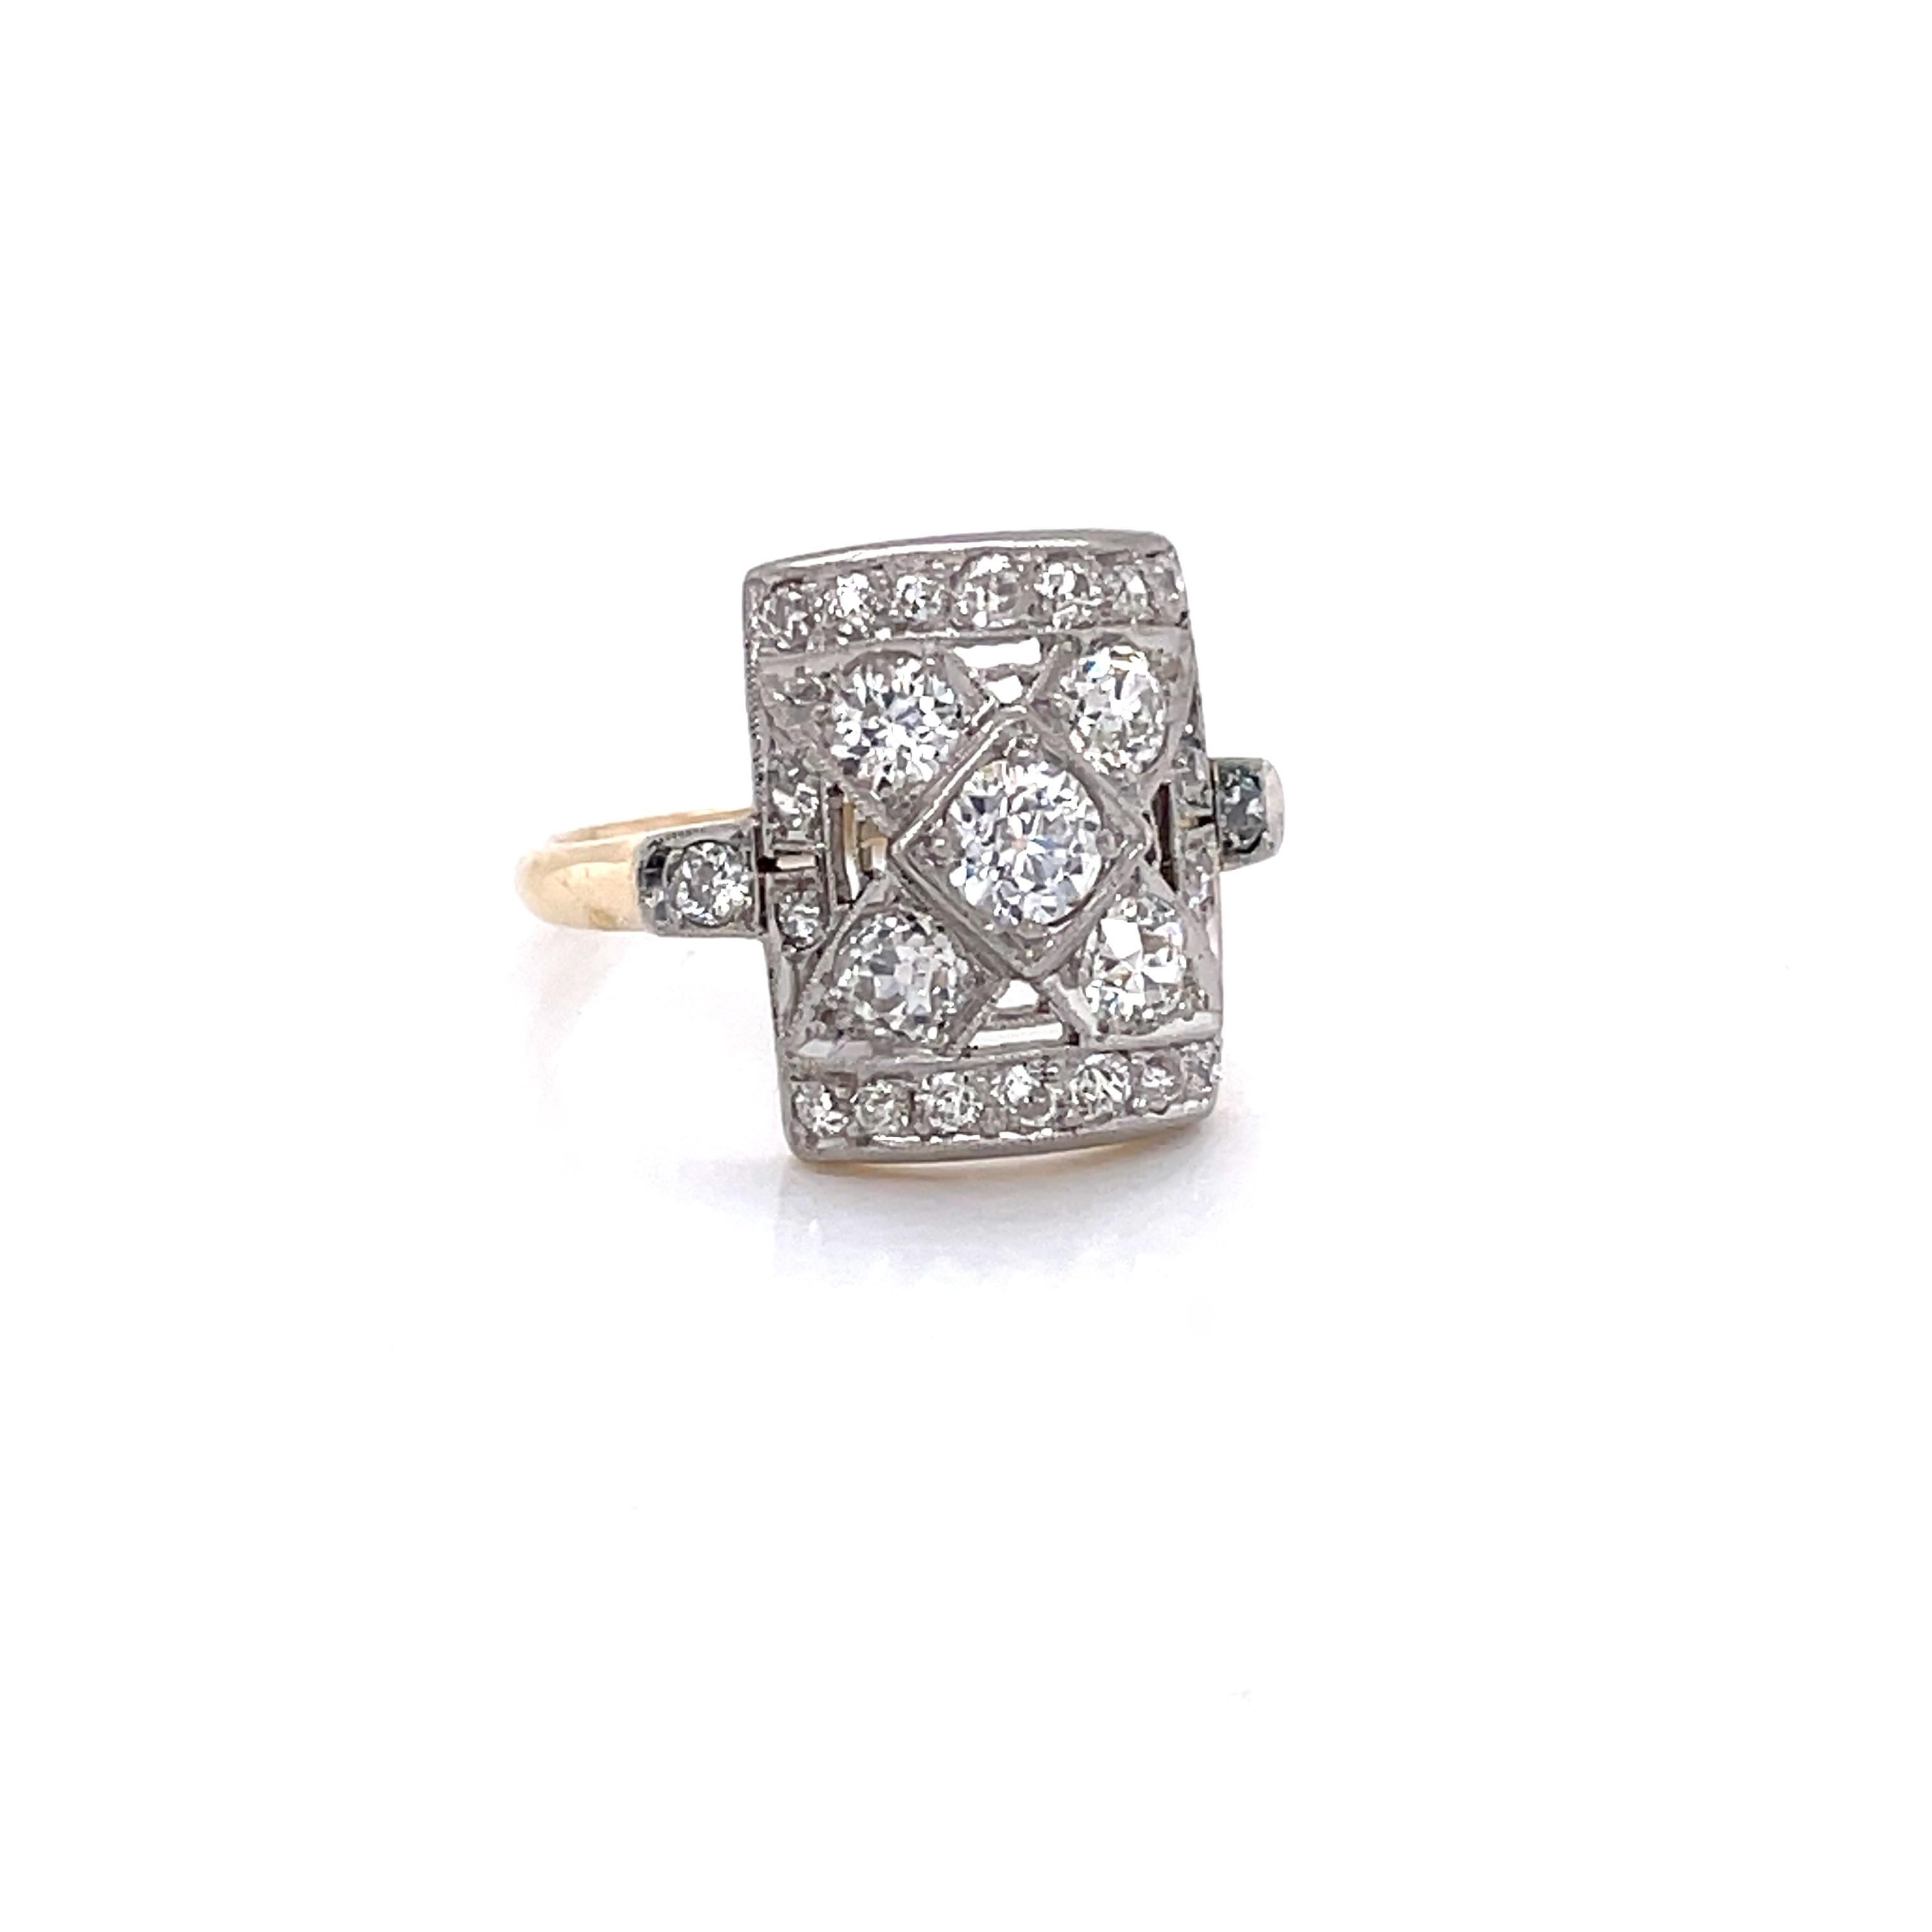 Set in platinum are twenty three Miner's Cut H/VS diamonds, 1.25 carats total weight, beautifully arranged in a lattice inspired design on this fine antique ring. The unique rectangular shaped table of the ring measures a generous 11 x 14.5mm and is